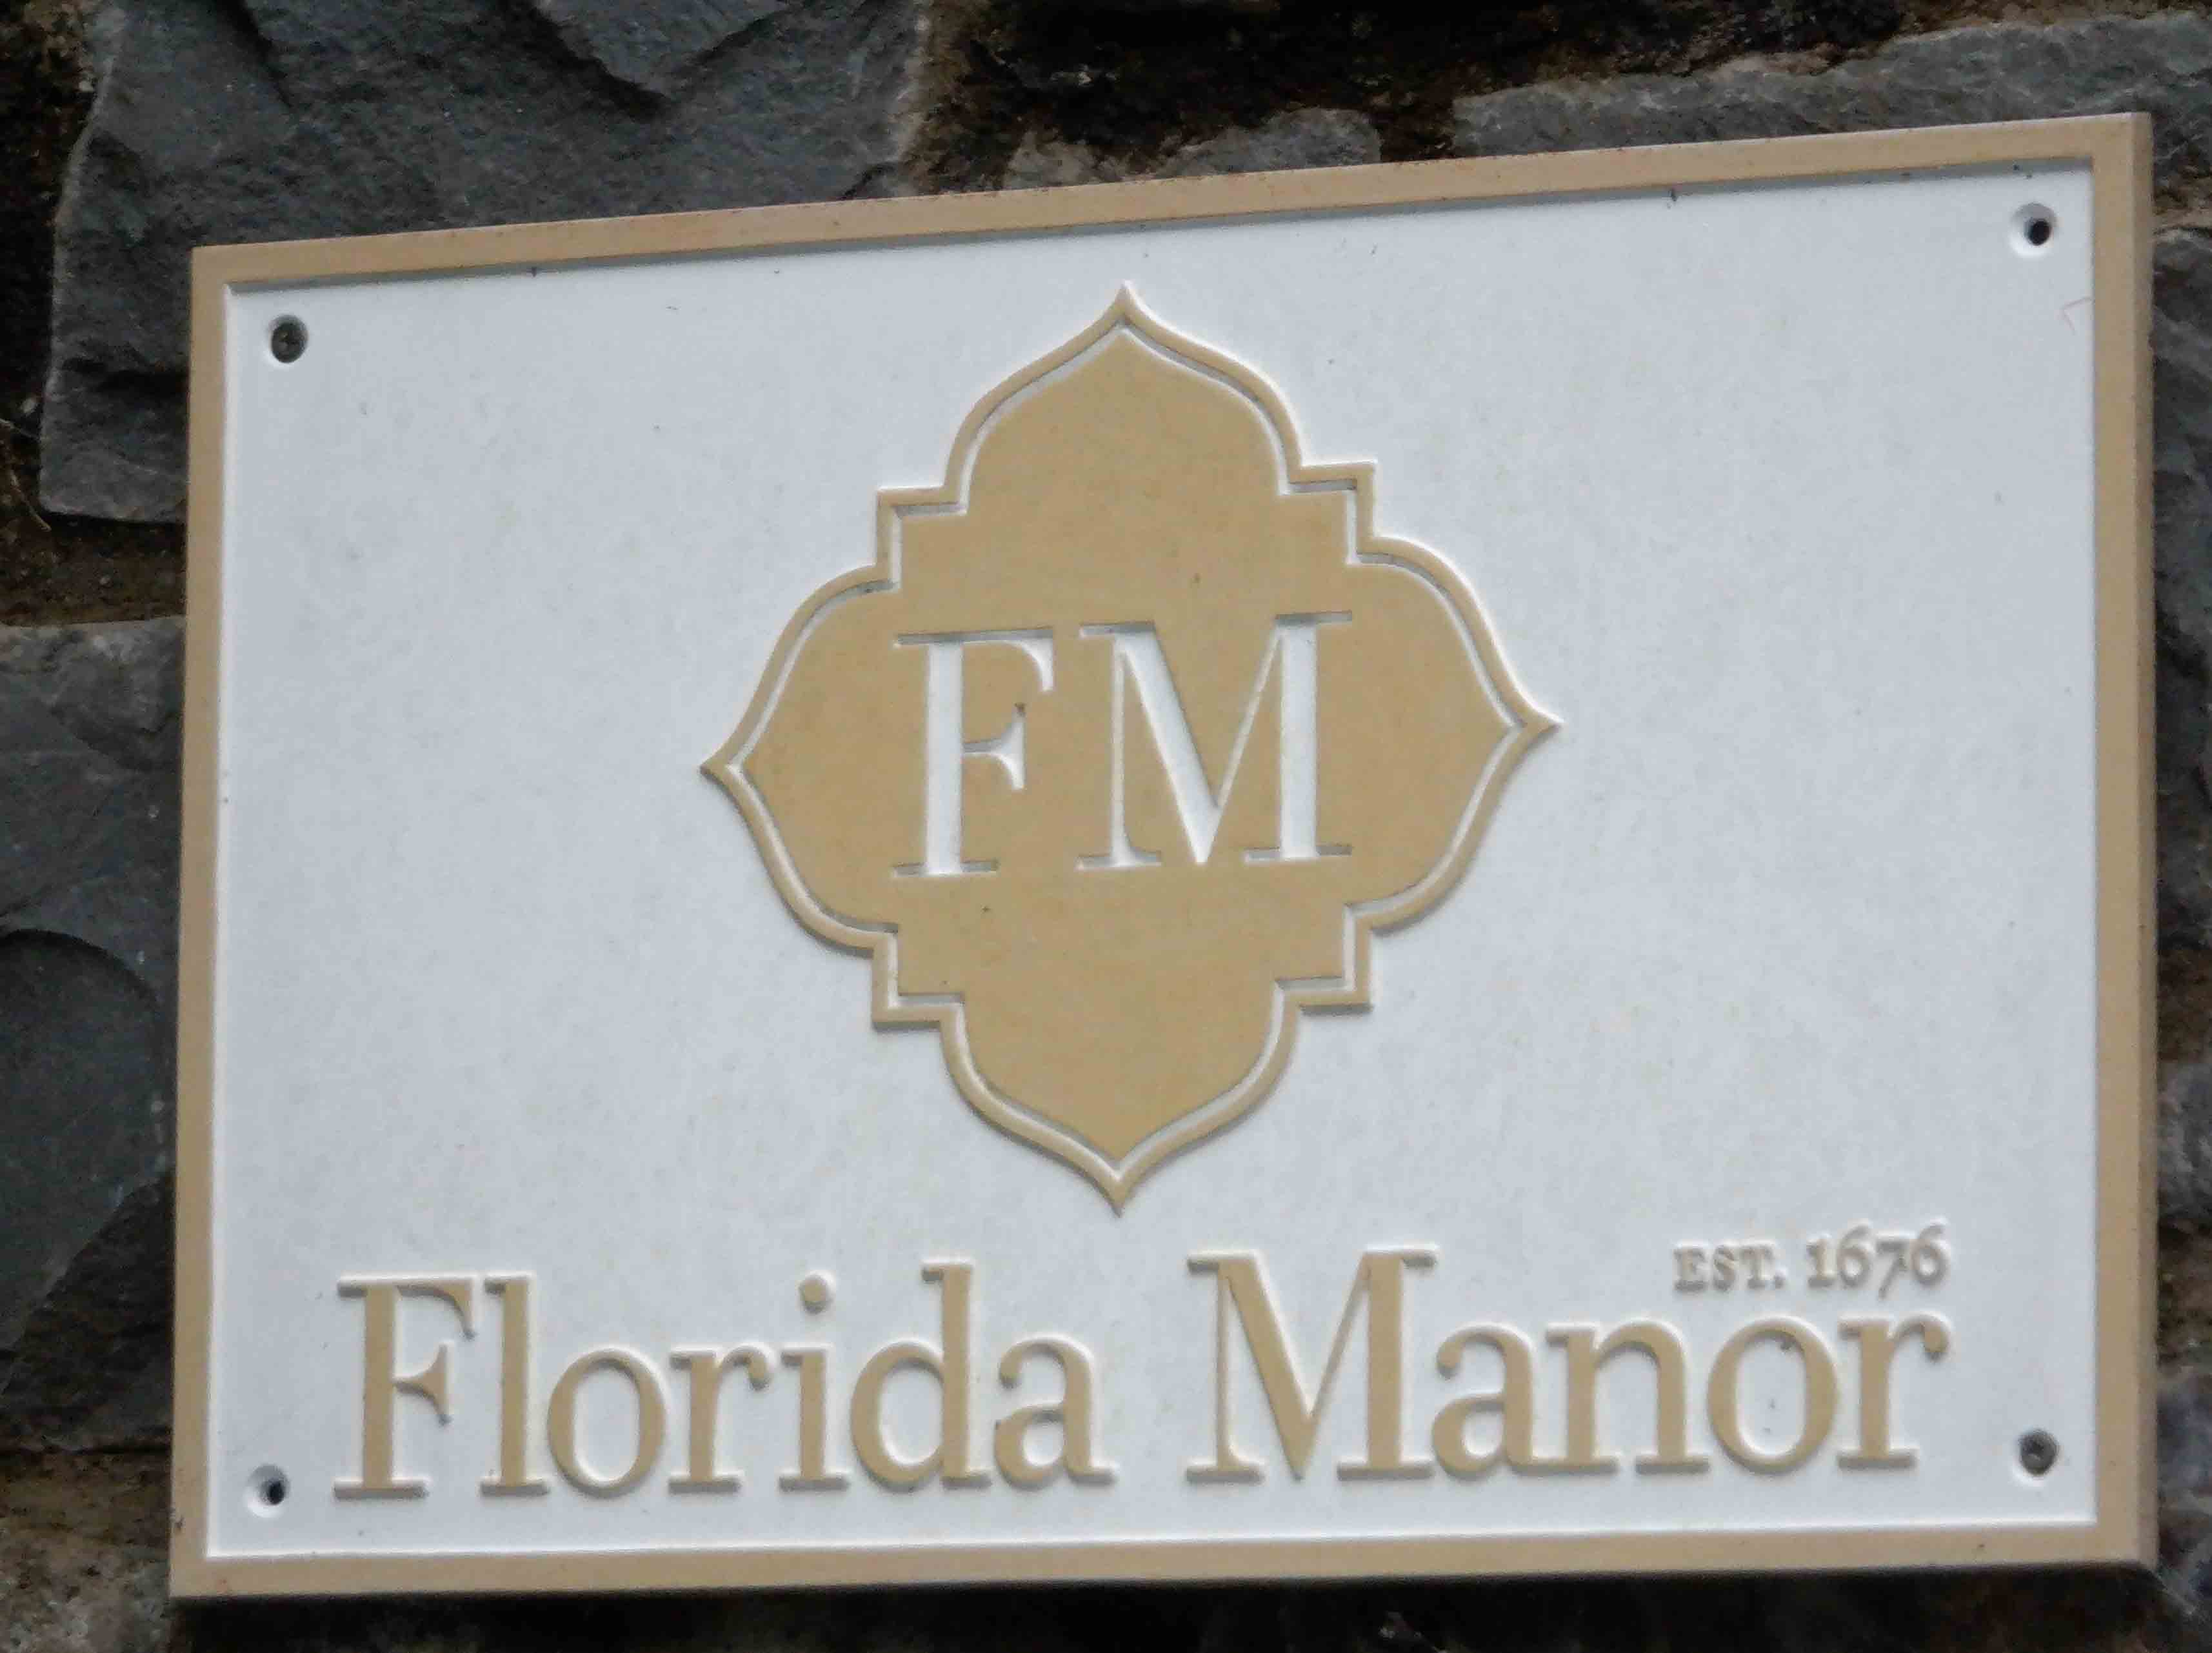 When was Florida Manor established? Answer - 1676.